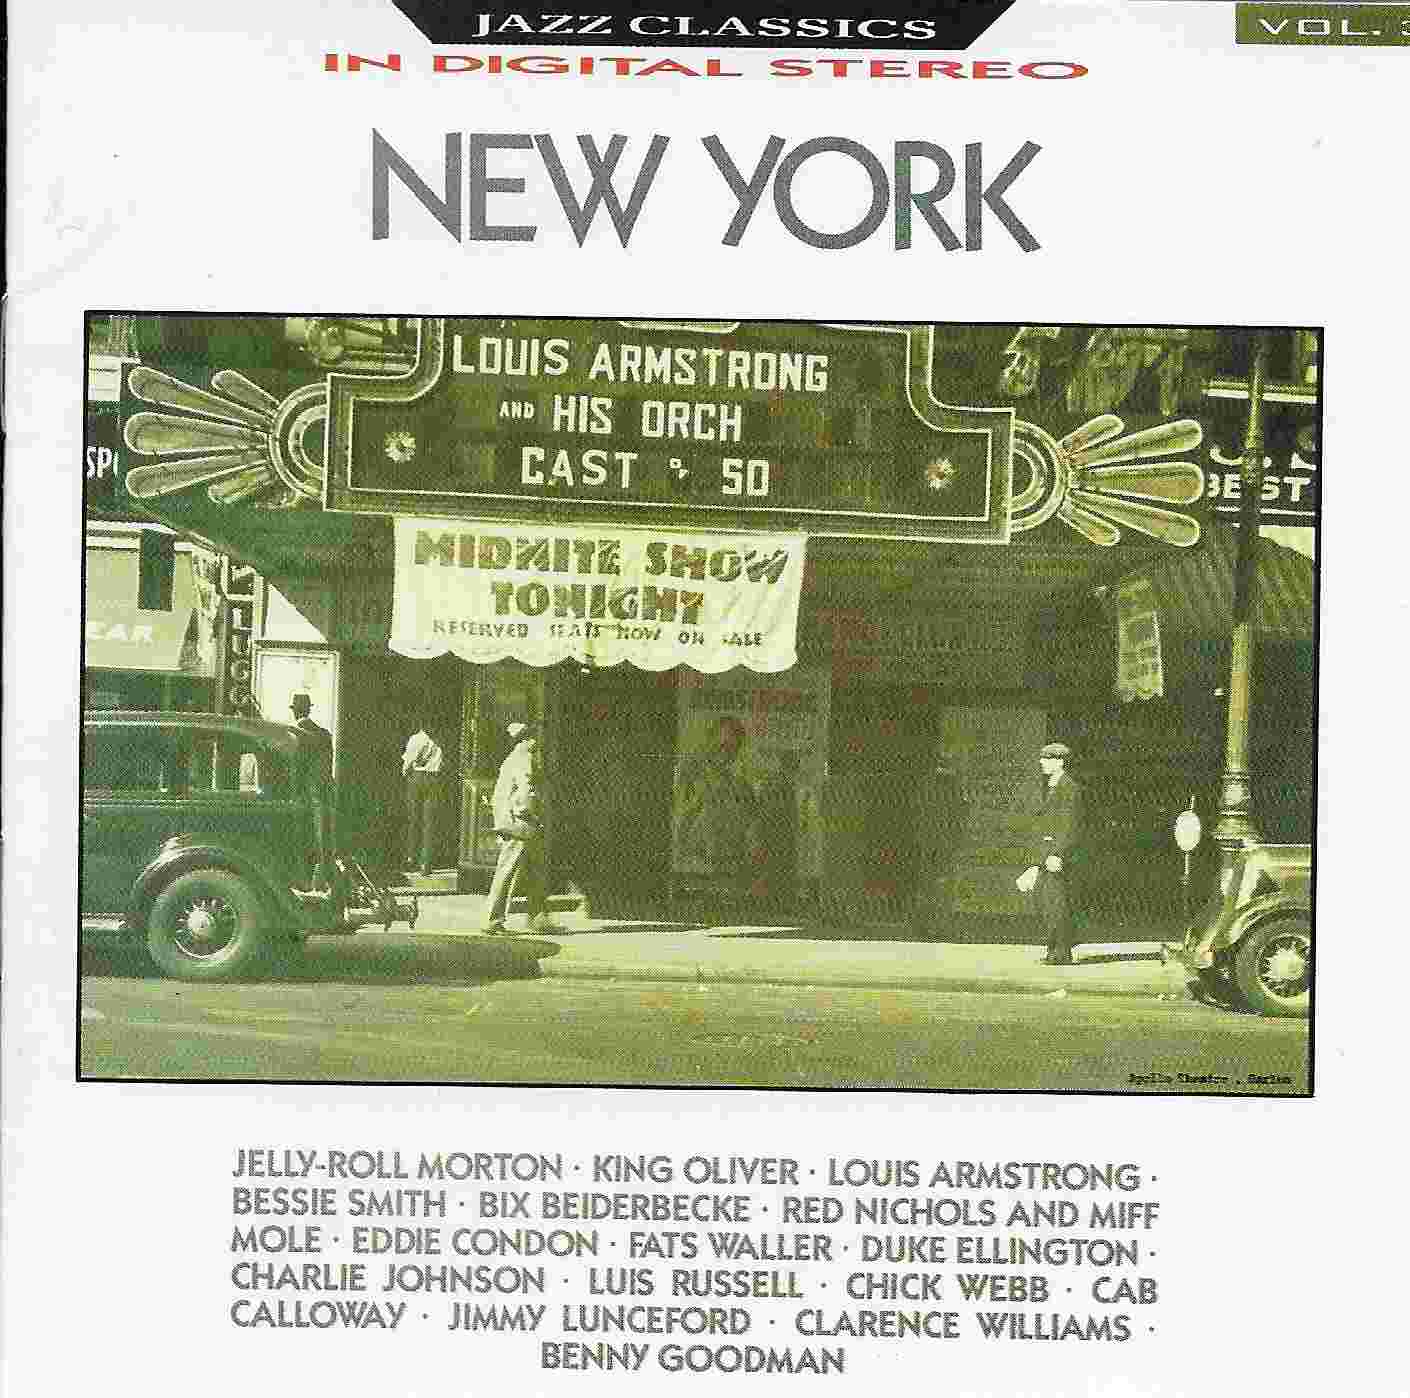 Picture of BBCCD590 Jazz Classics - Volume 3, New York by artist Various from the BBC cds - Records and Tapes library